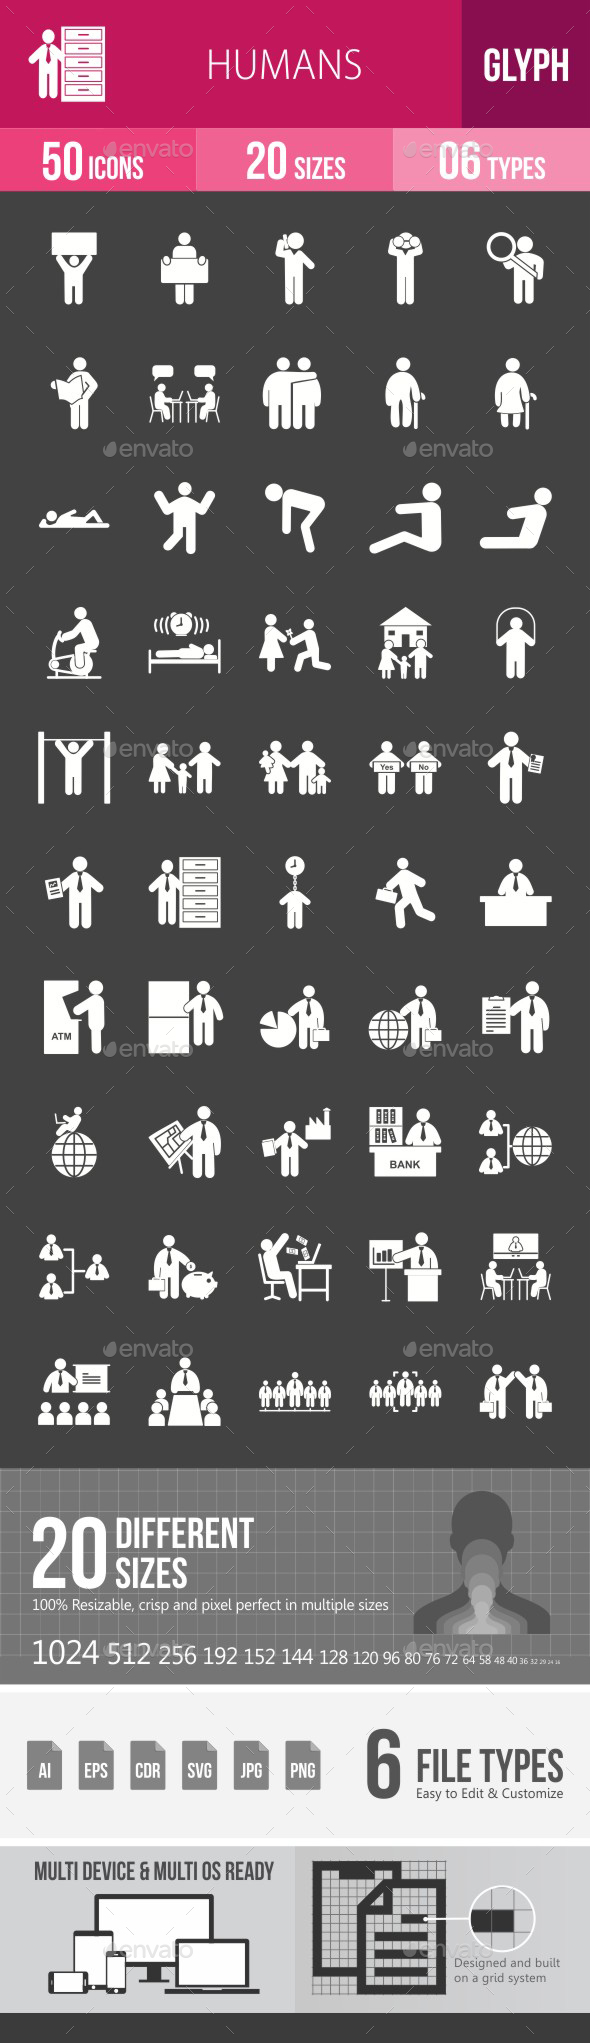 Humans Glyph Inverted Icons